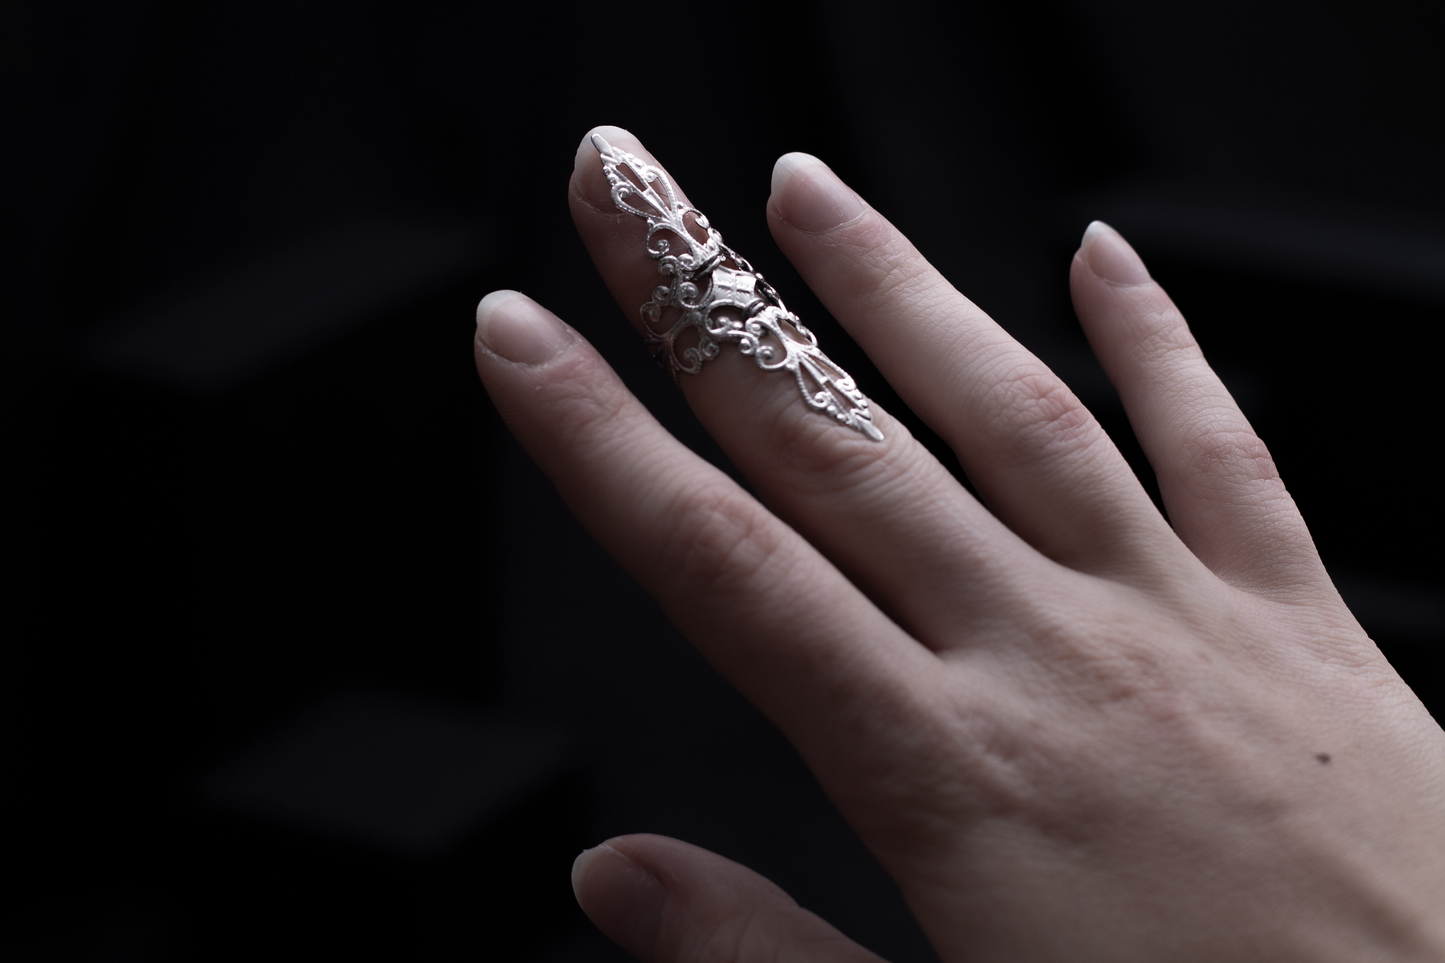 A woman's hand elegantly displaying a silver filigree full-finger midi ring against a dark background with geometric shapes, embodying a sophisticated gothic style.